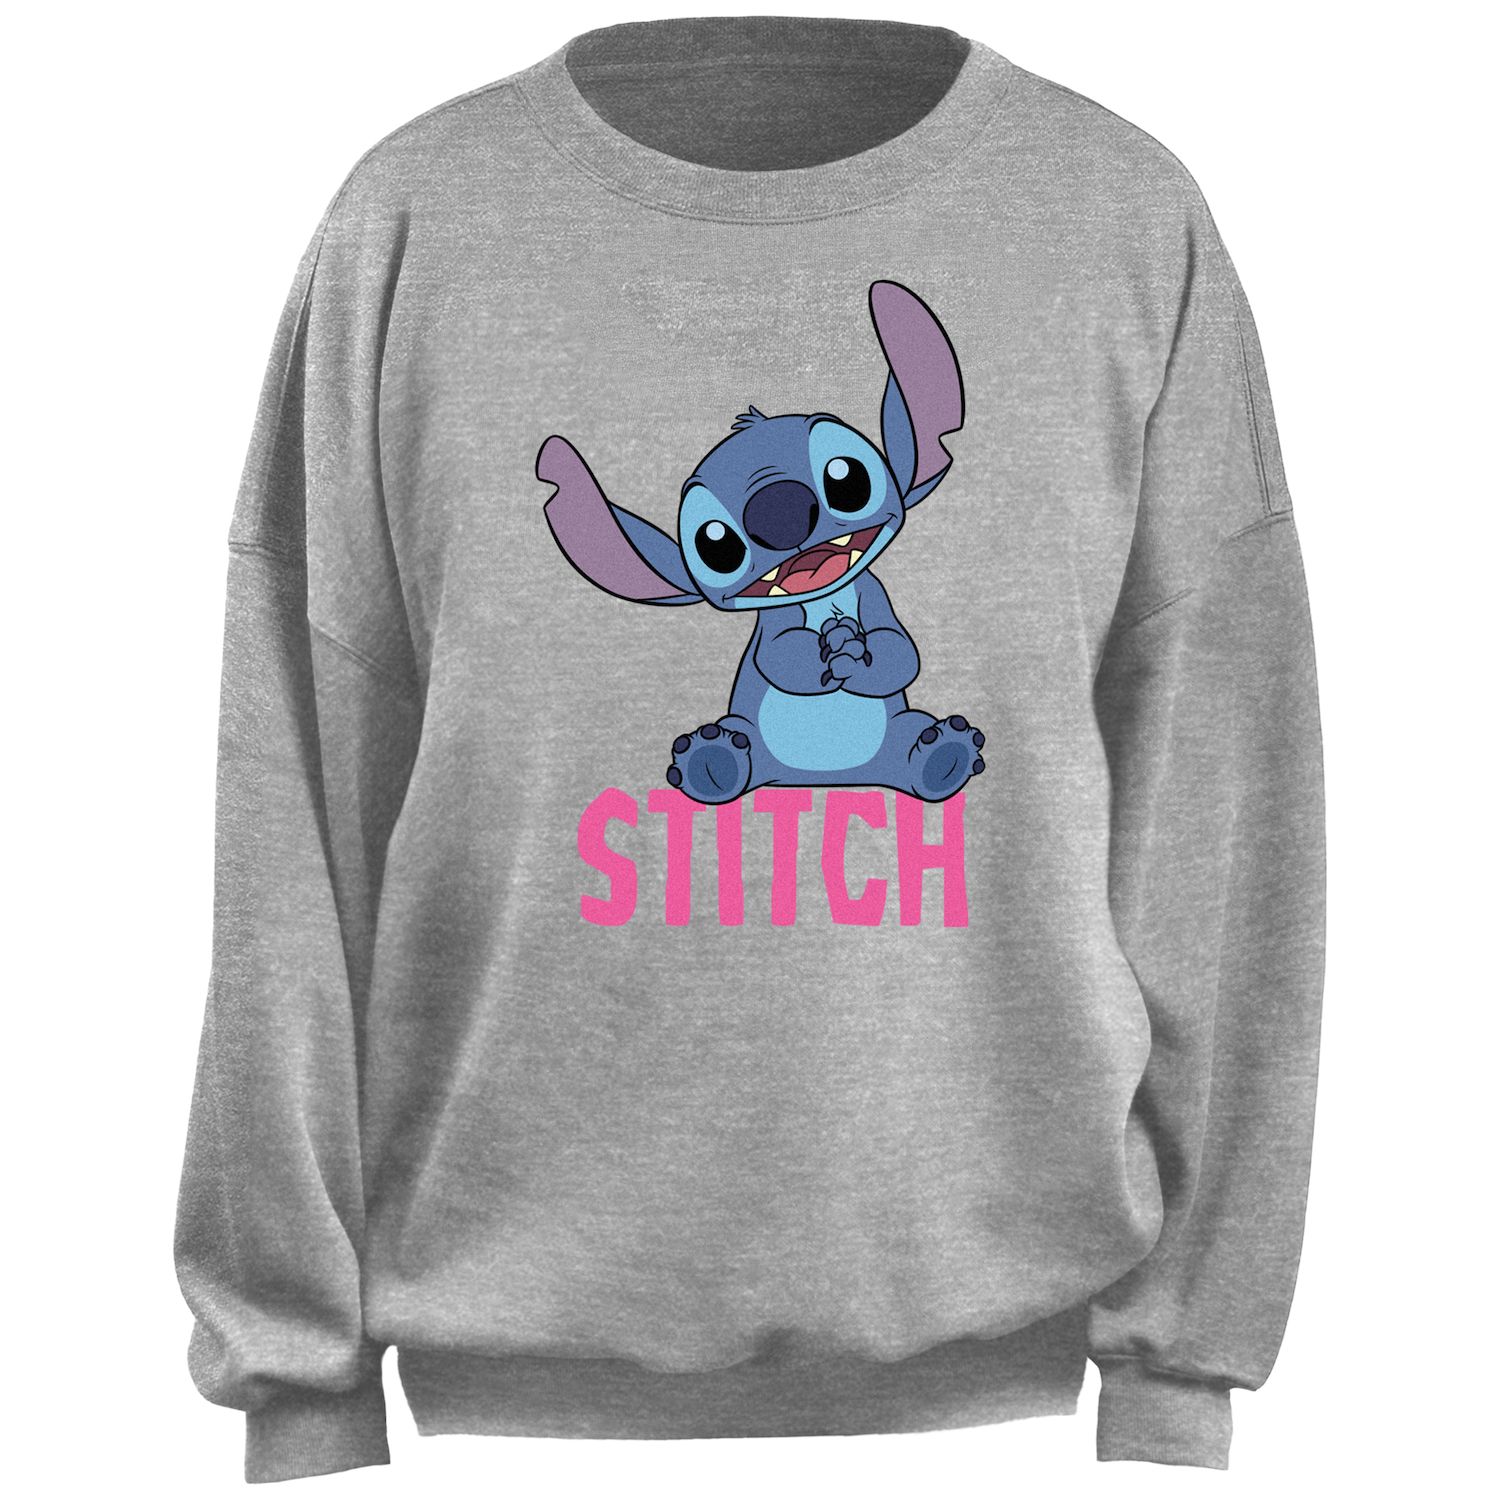 Disney Lilo & Stitch Kids Christmas Jumper | Blue Graphic Knitted Sweater |  Xmas Pullover Knitwear | Winter Festive Gift